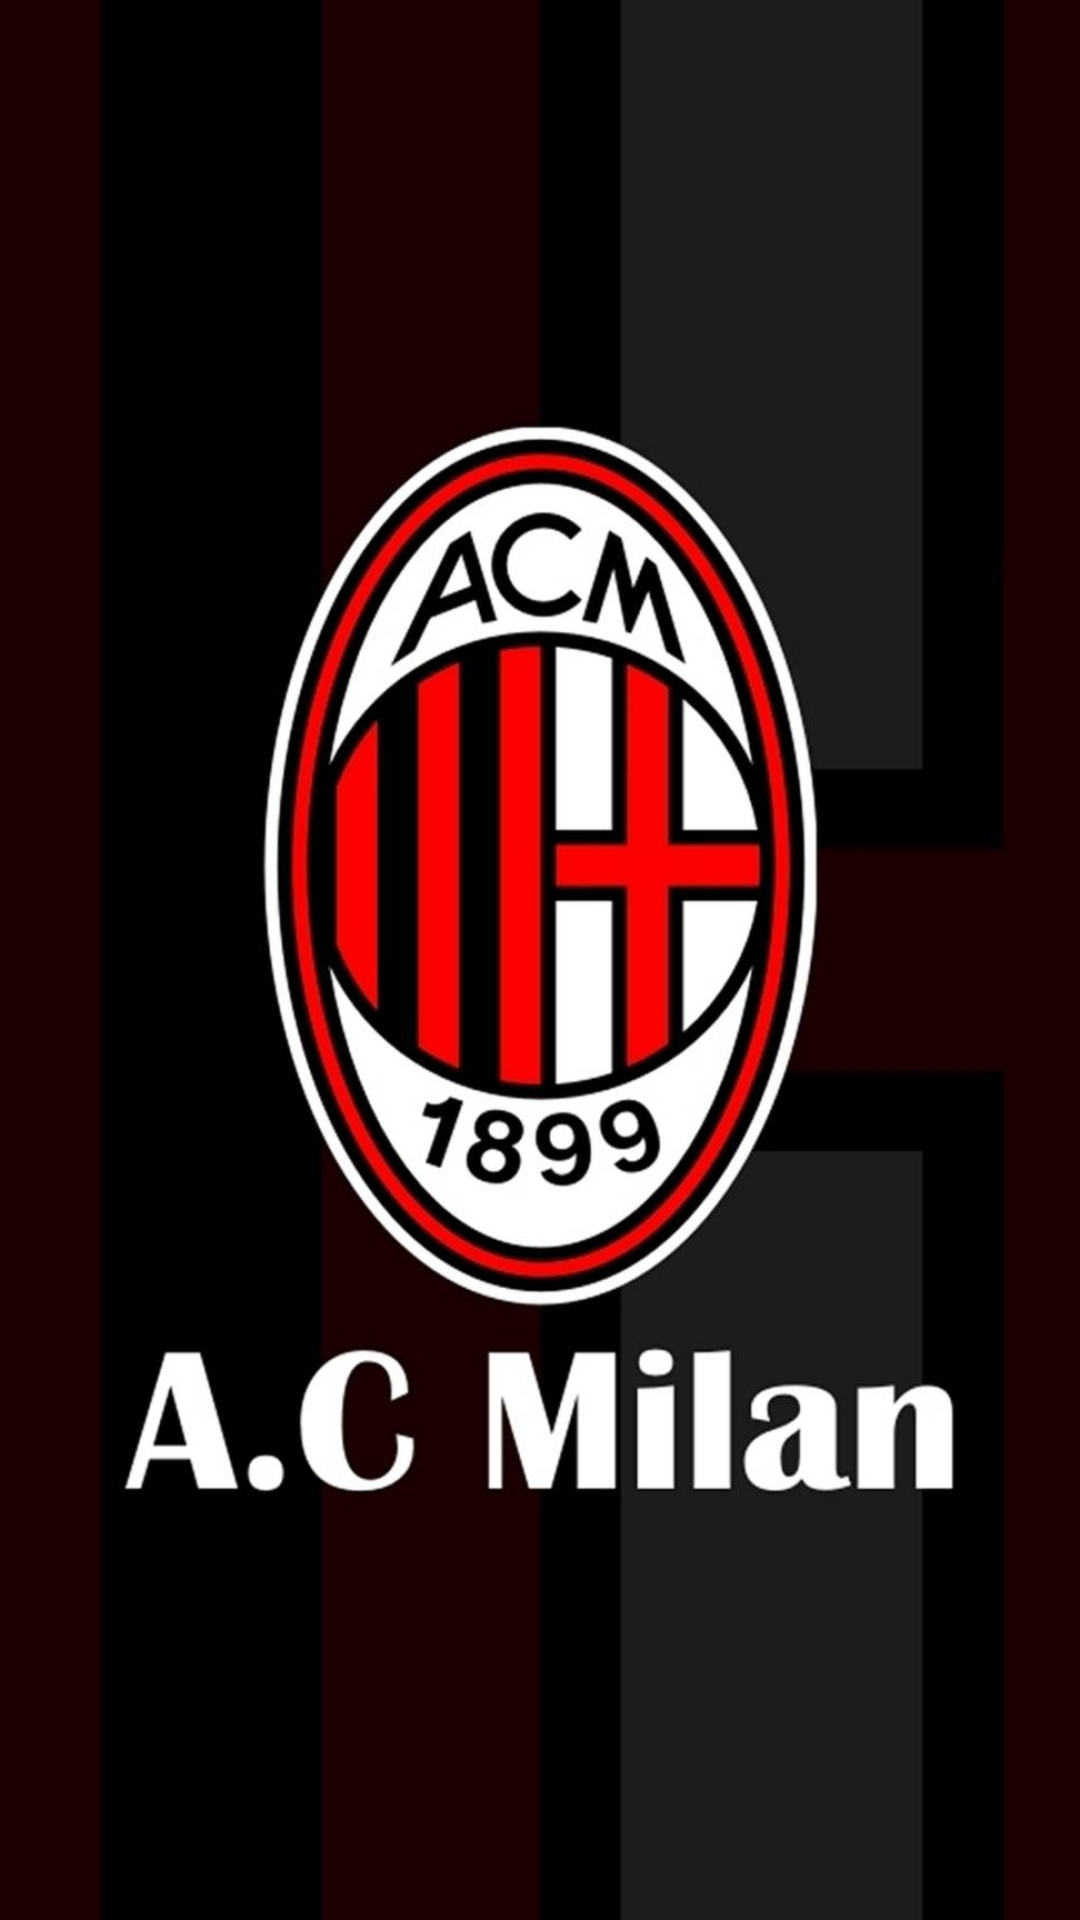 AC Milan, Android wallpapers, Mobile backgrounds, Digital images, 1080x1920 Full HD Phone